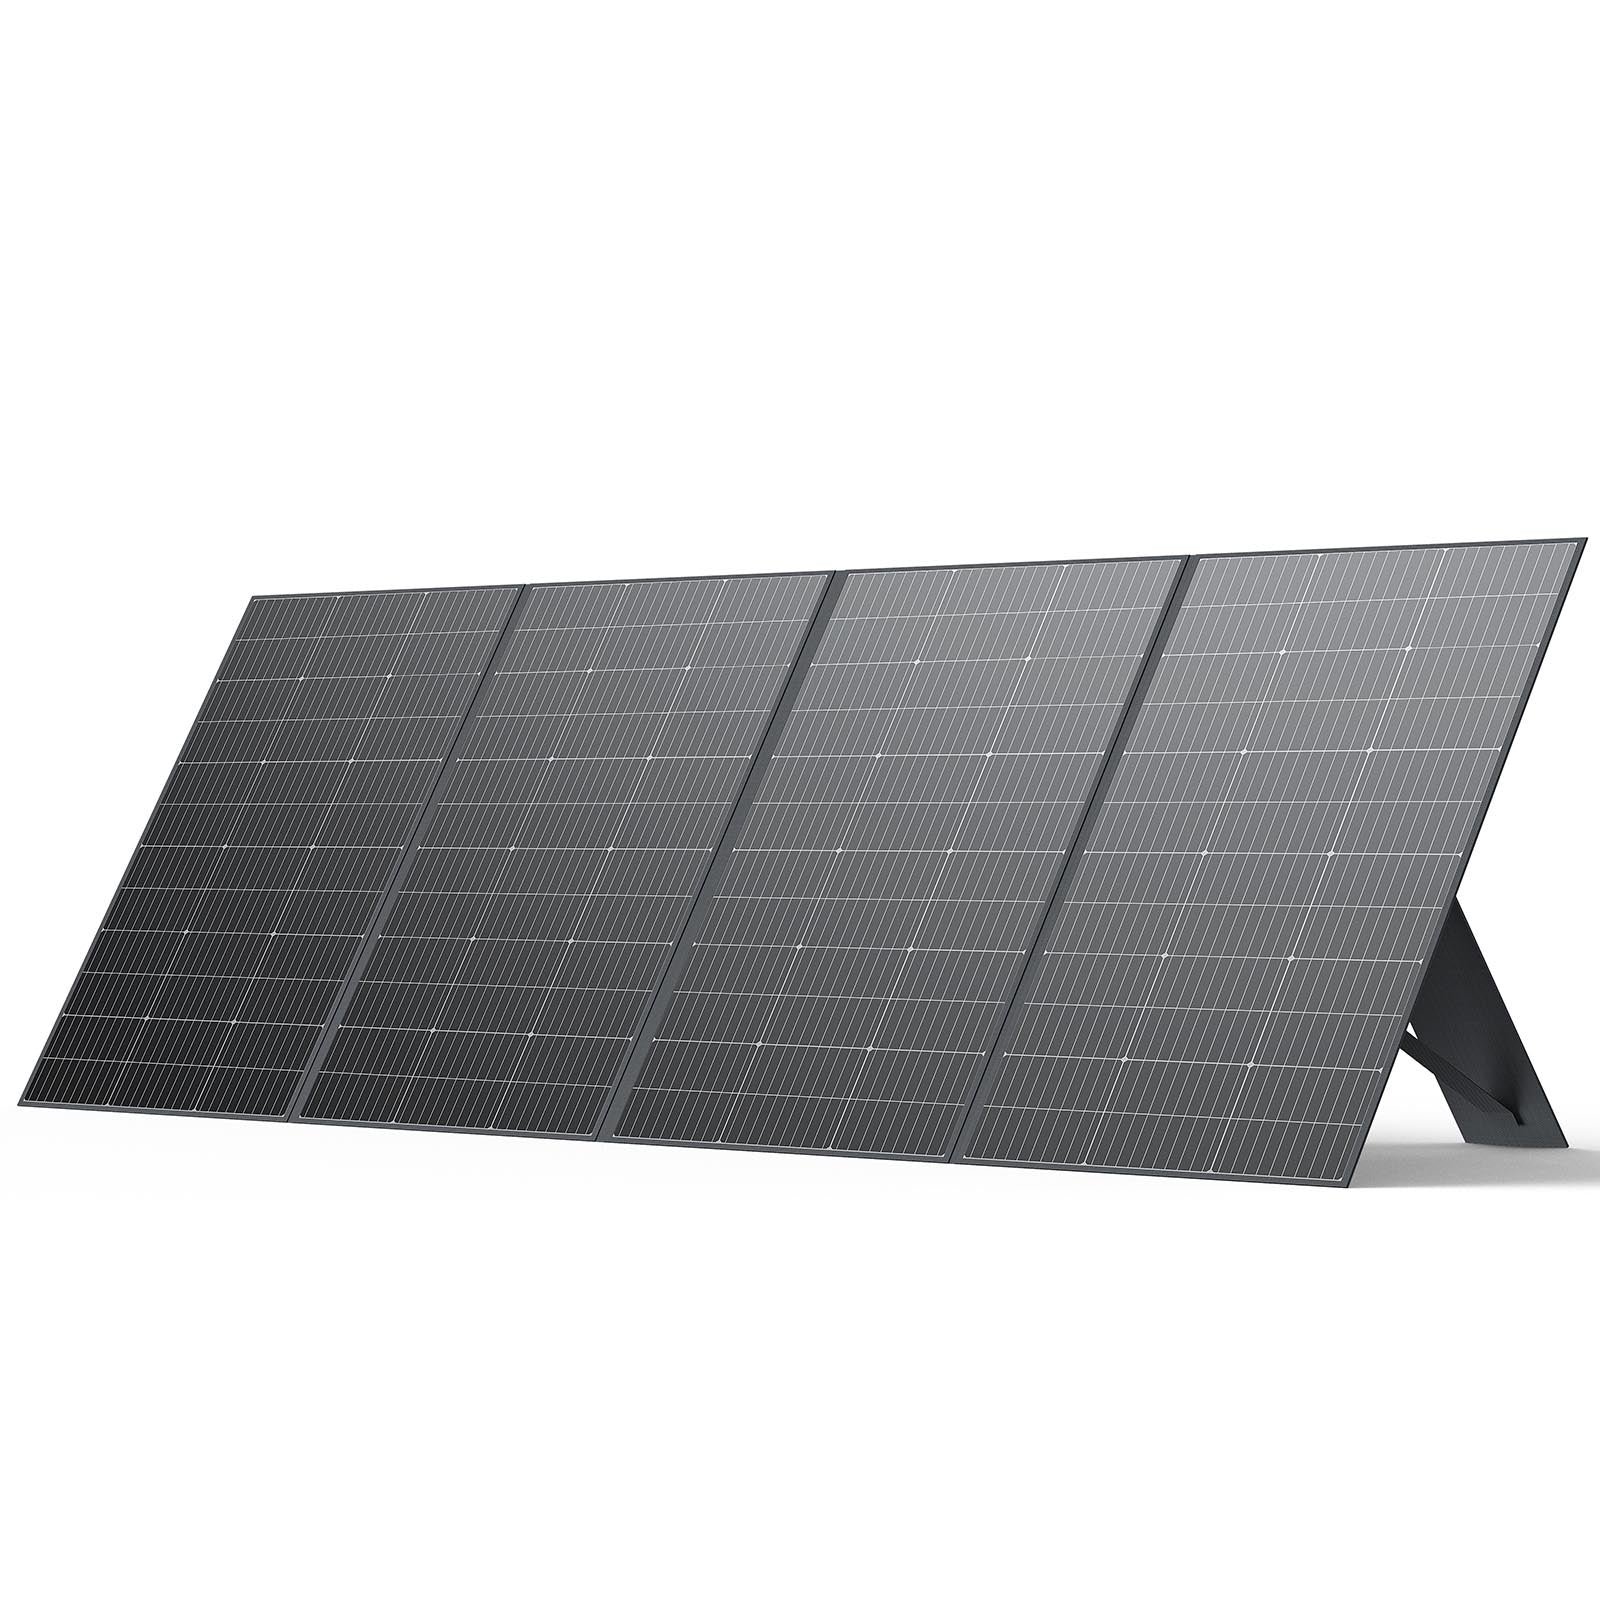 DBS420S Portable Solar Panel for Power Station | 420W